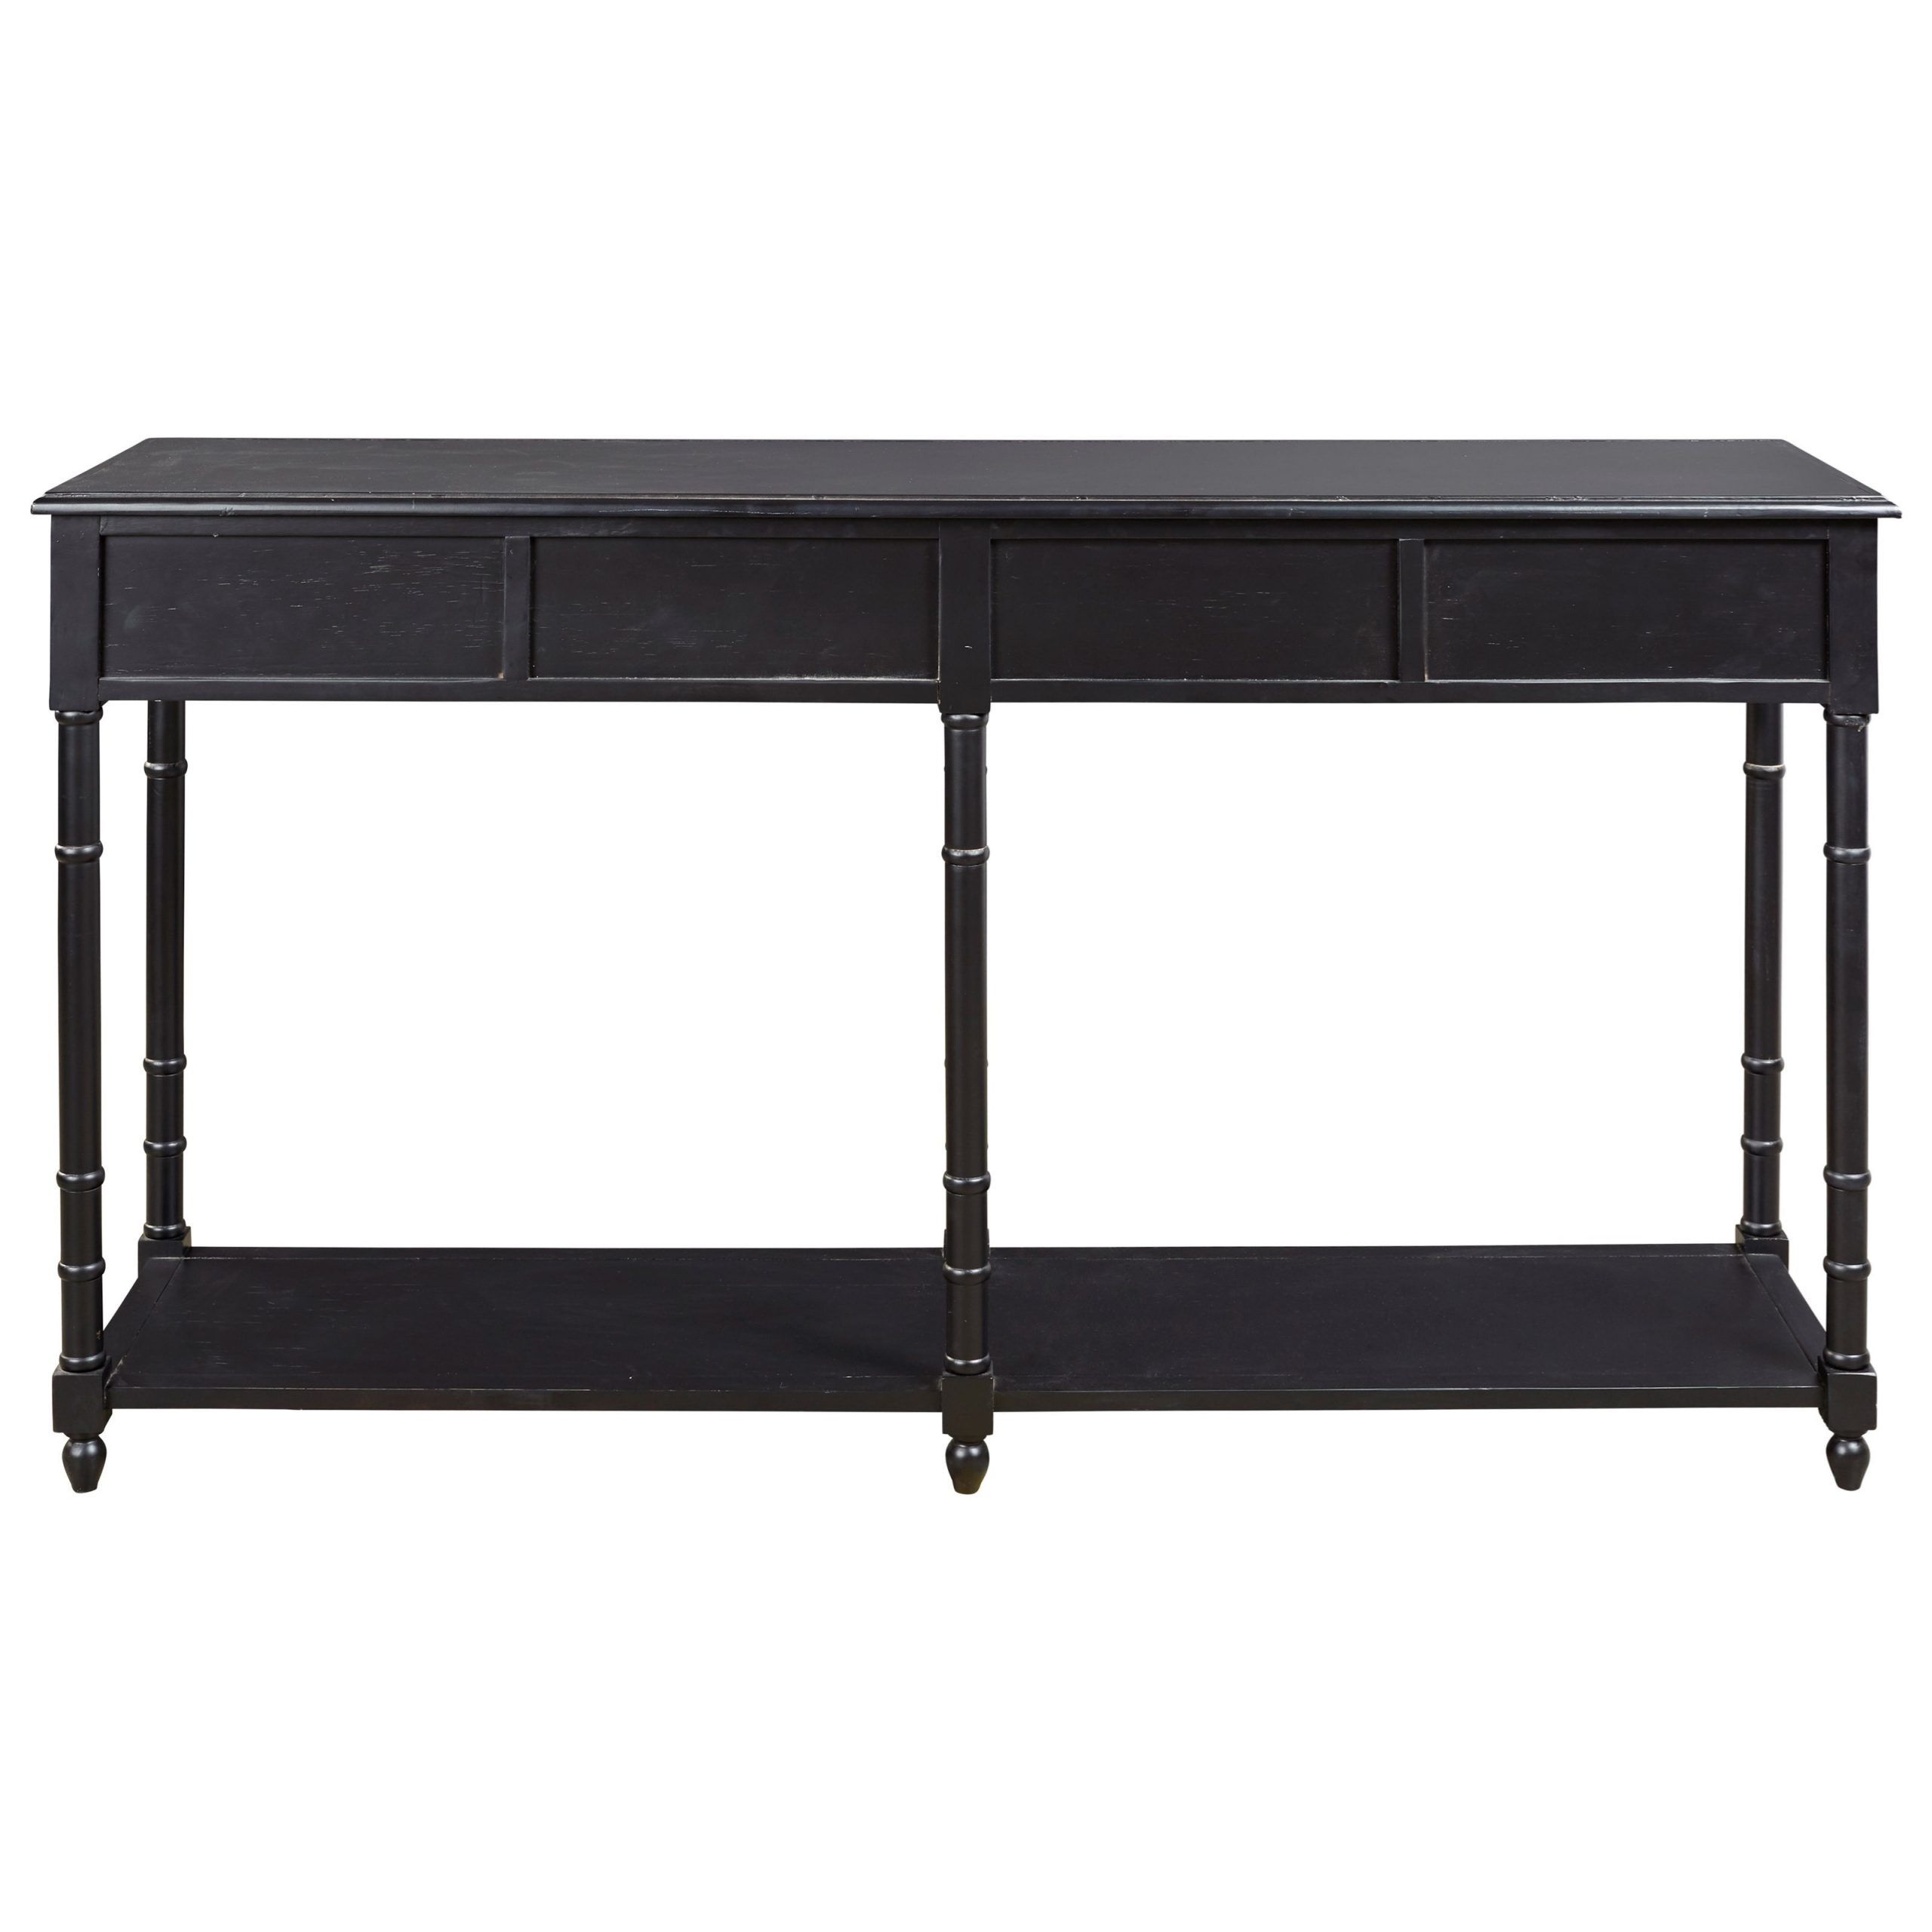 Signature Designashley Eirdale Console Sofa Table With 4 Drawers With 1 Shelf Console Tables (View 1 of 20)